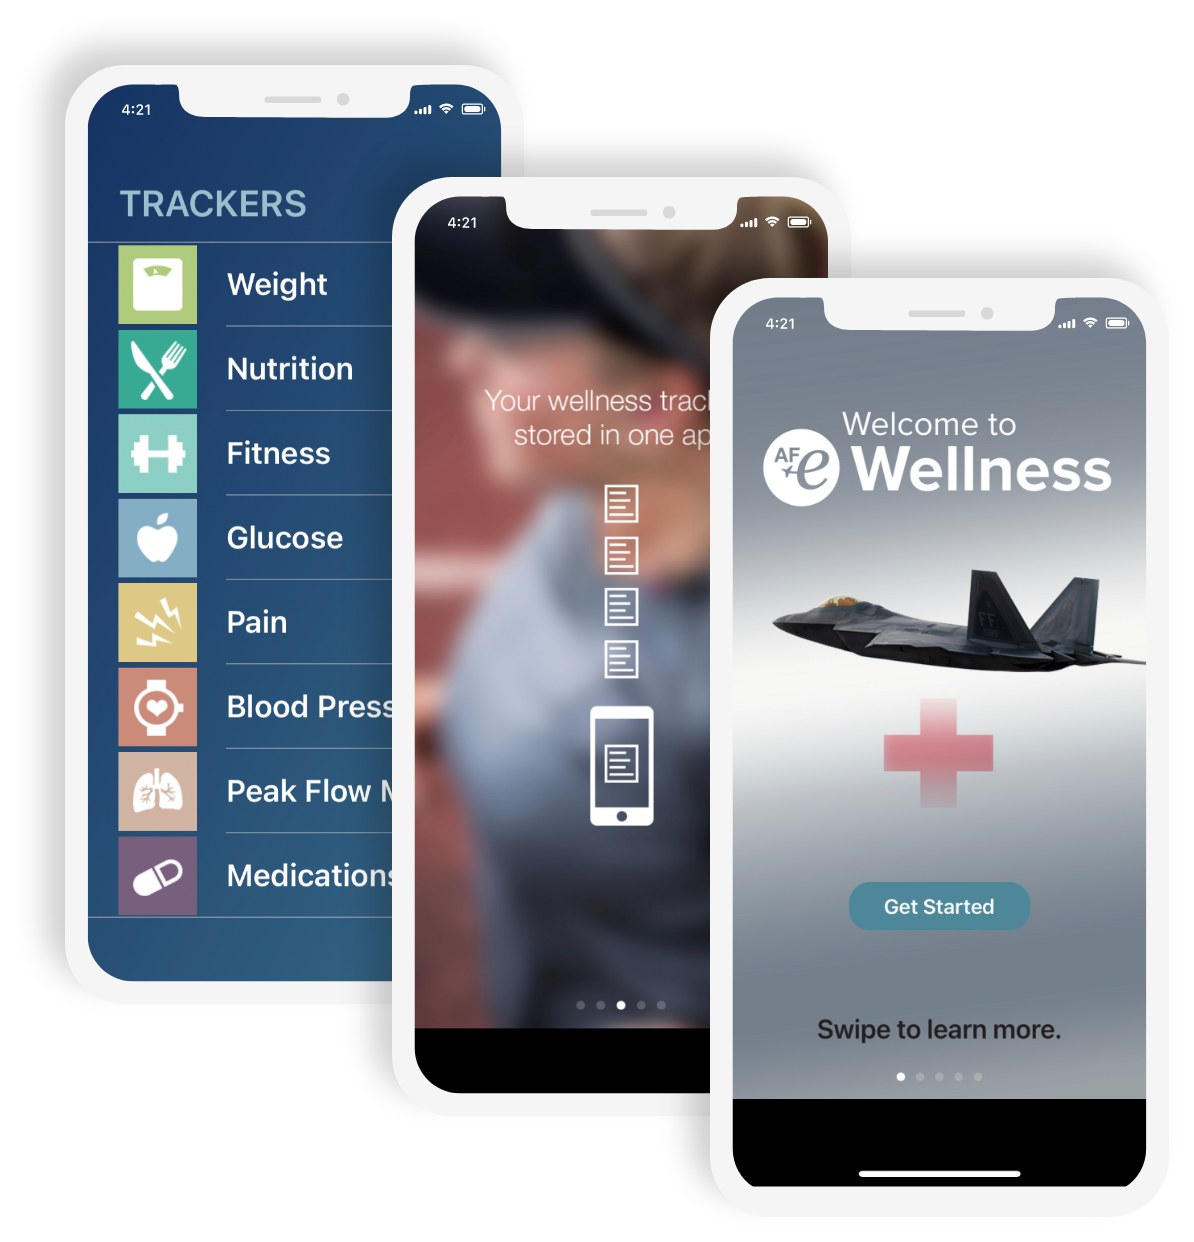 eWellness application. A view of the introduction, trackers and detailed tracker section's of the application.